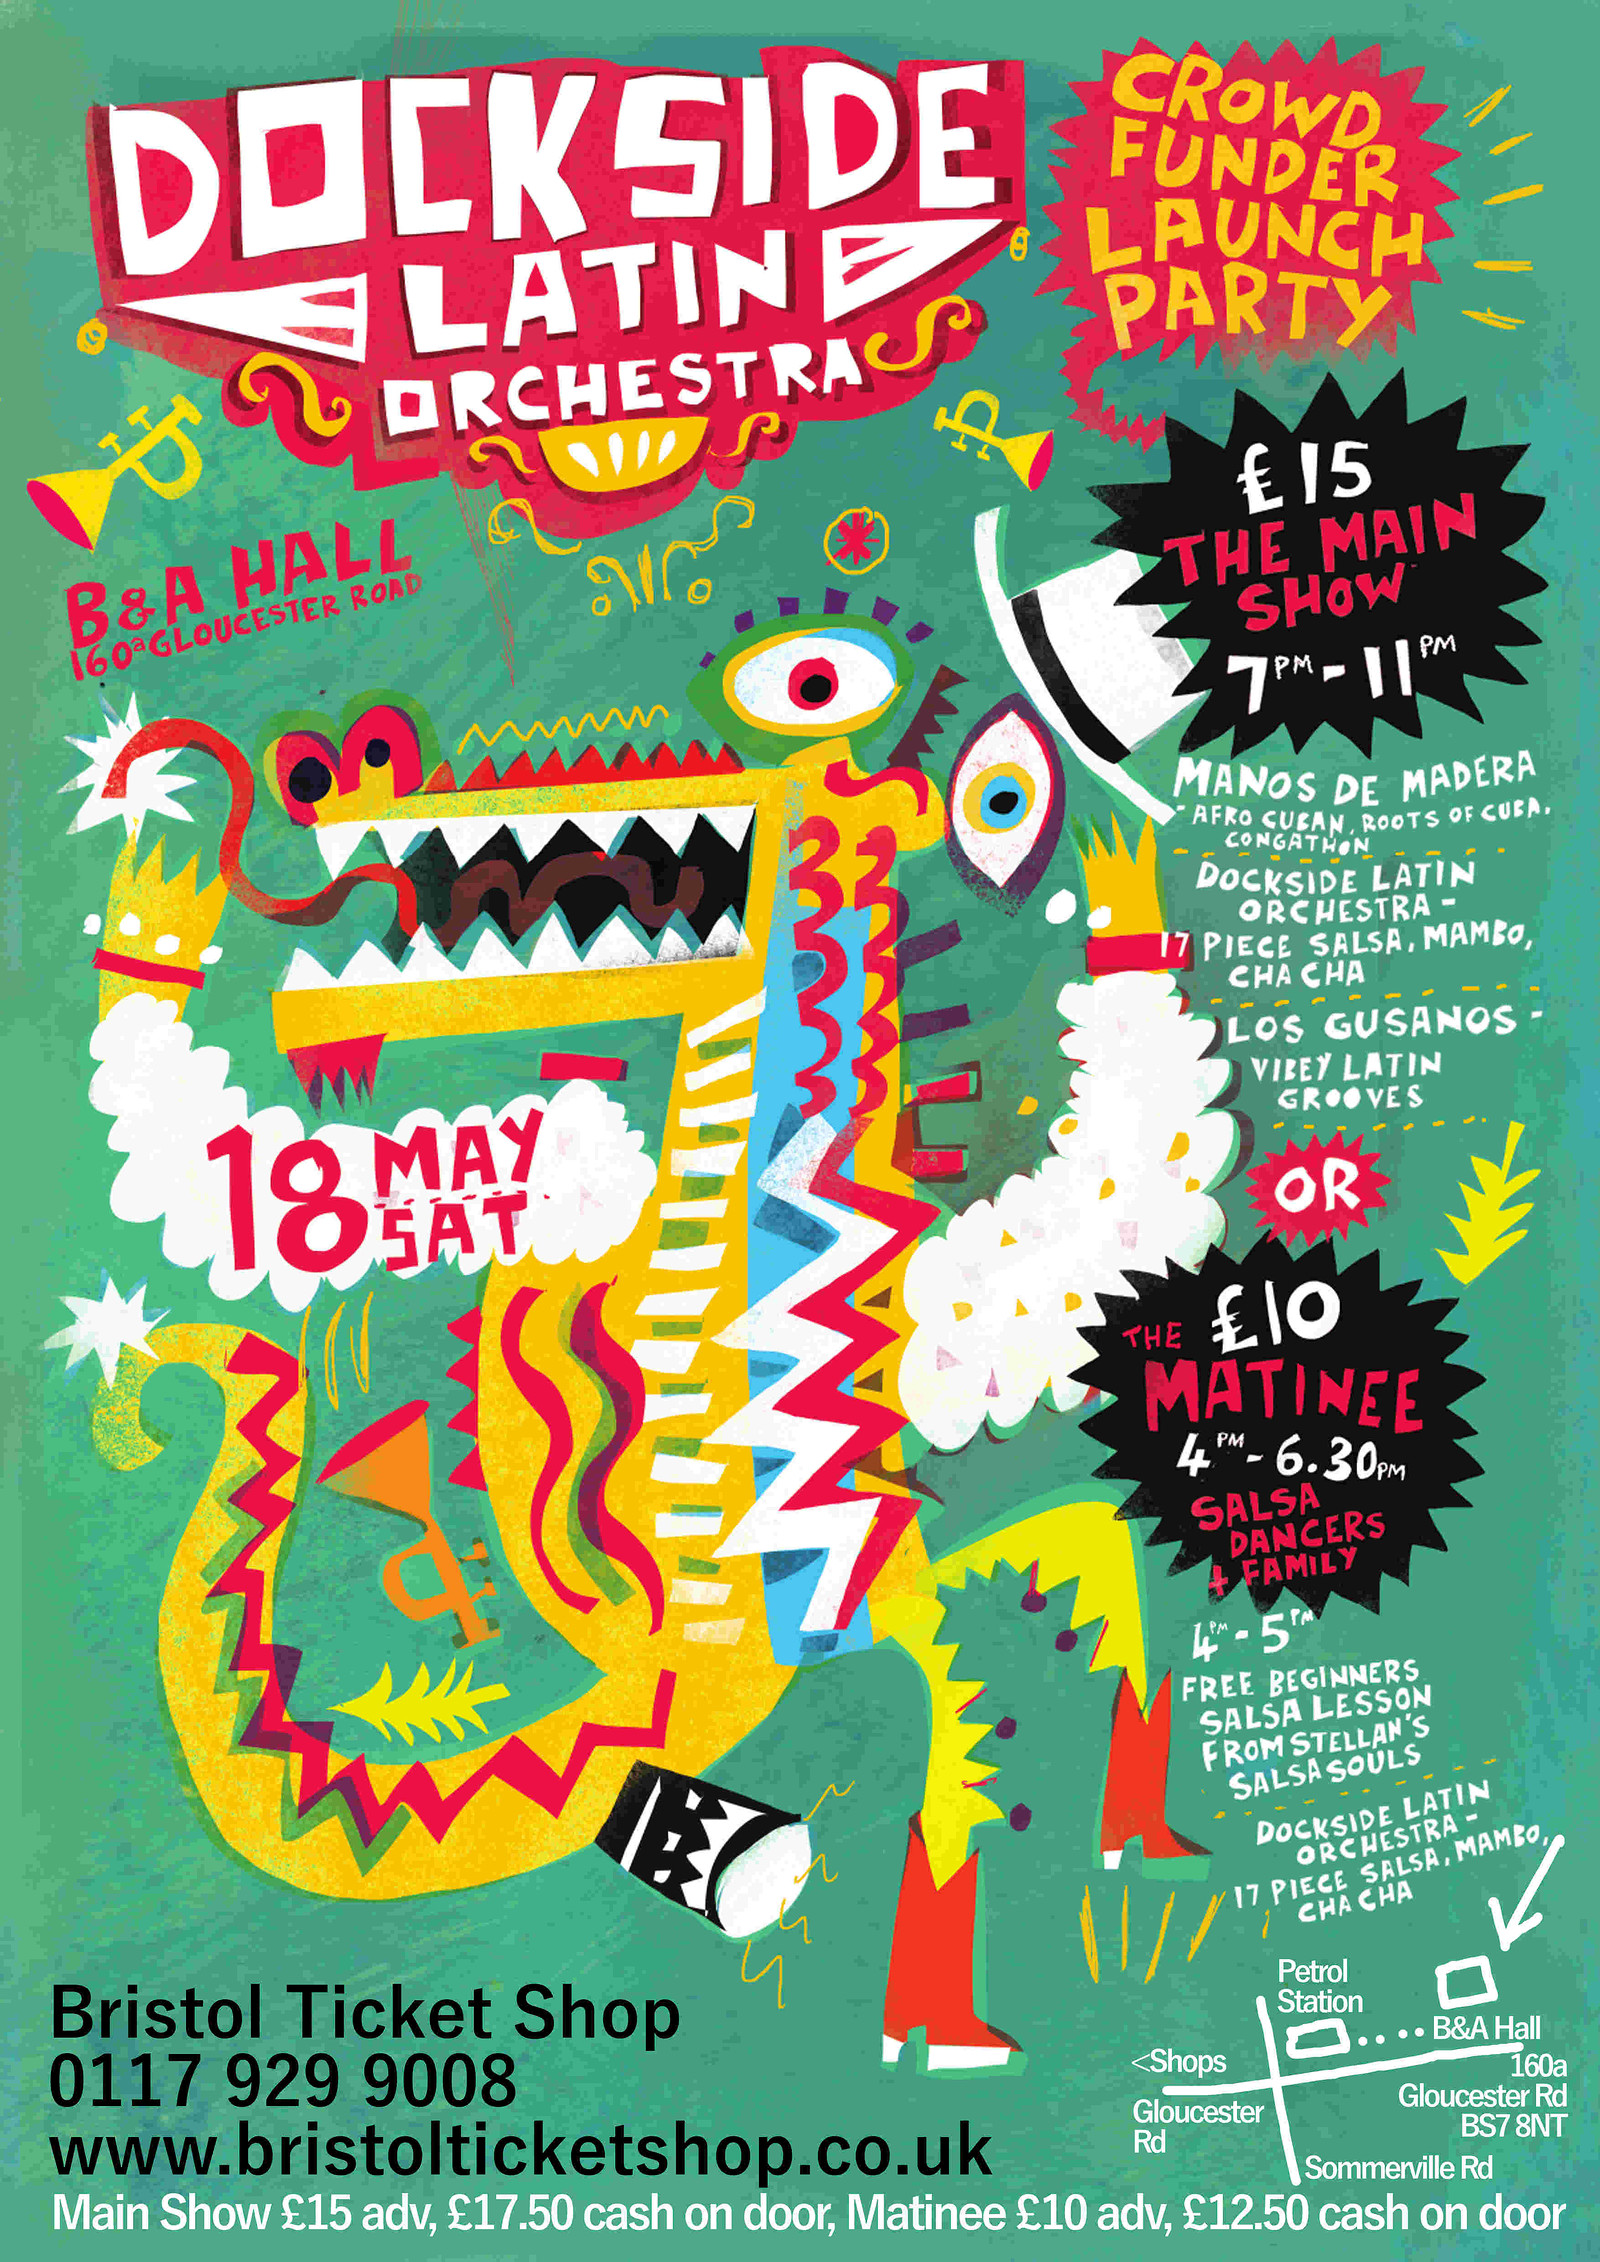 Dockside Latin Orchestra Crowdfunded - MAIN SHOW at B&A Hall, 160a Gloucester Rd, Bristol